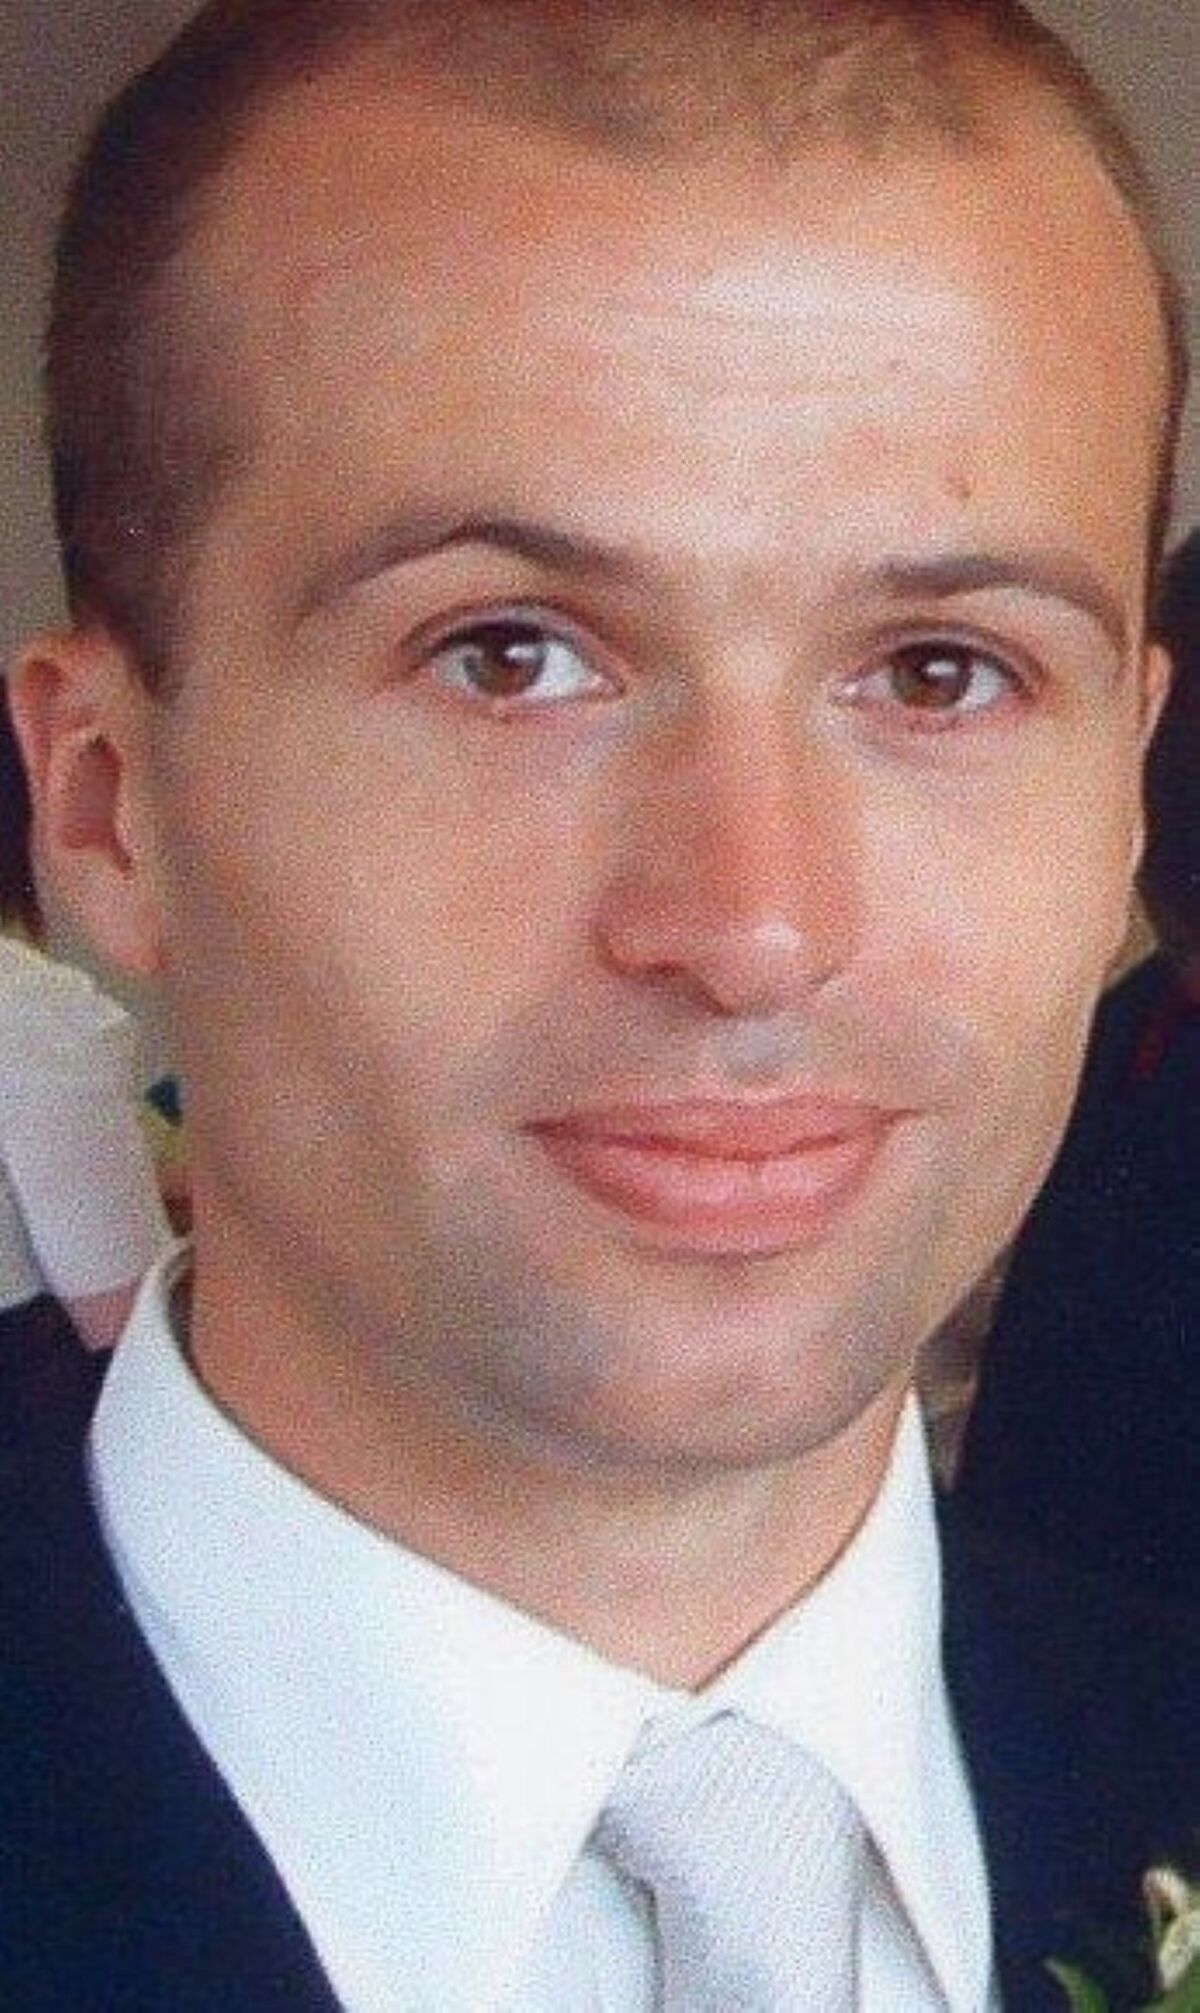 Gareth Wyn Williams, the MI6 intelligence worker whose naked and decomposing body was found in August 2010 stuffed into a zipped and padlocked gym bag. Scotland Yard on Wednesday revised his suspected cause of death from "unlawful" killing to likely the result of an accident that occurred when he was alone.